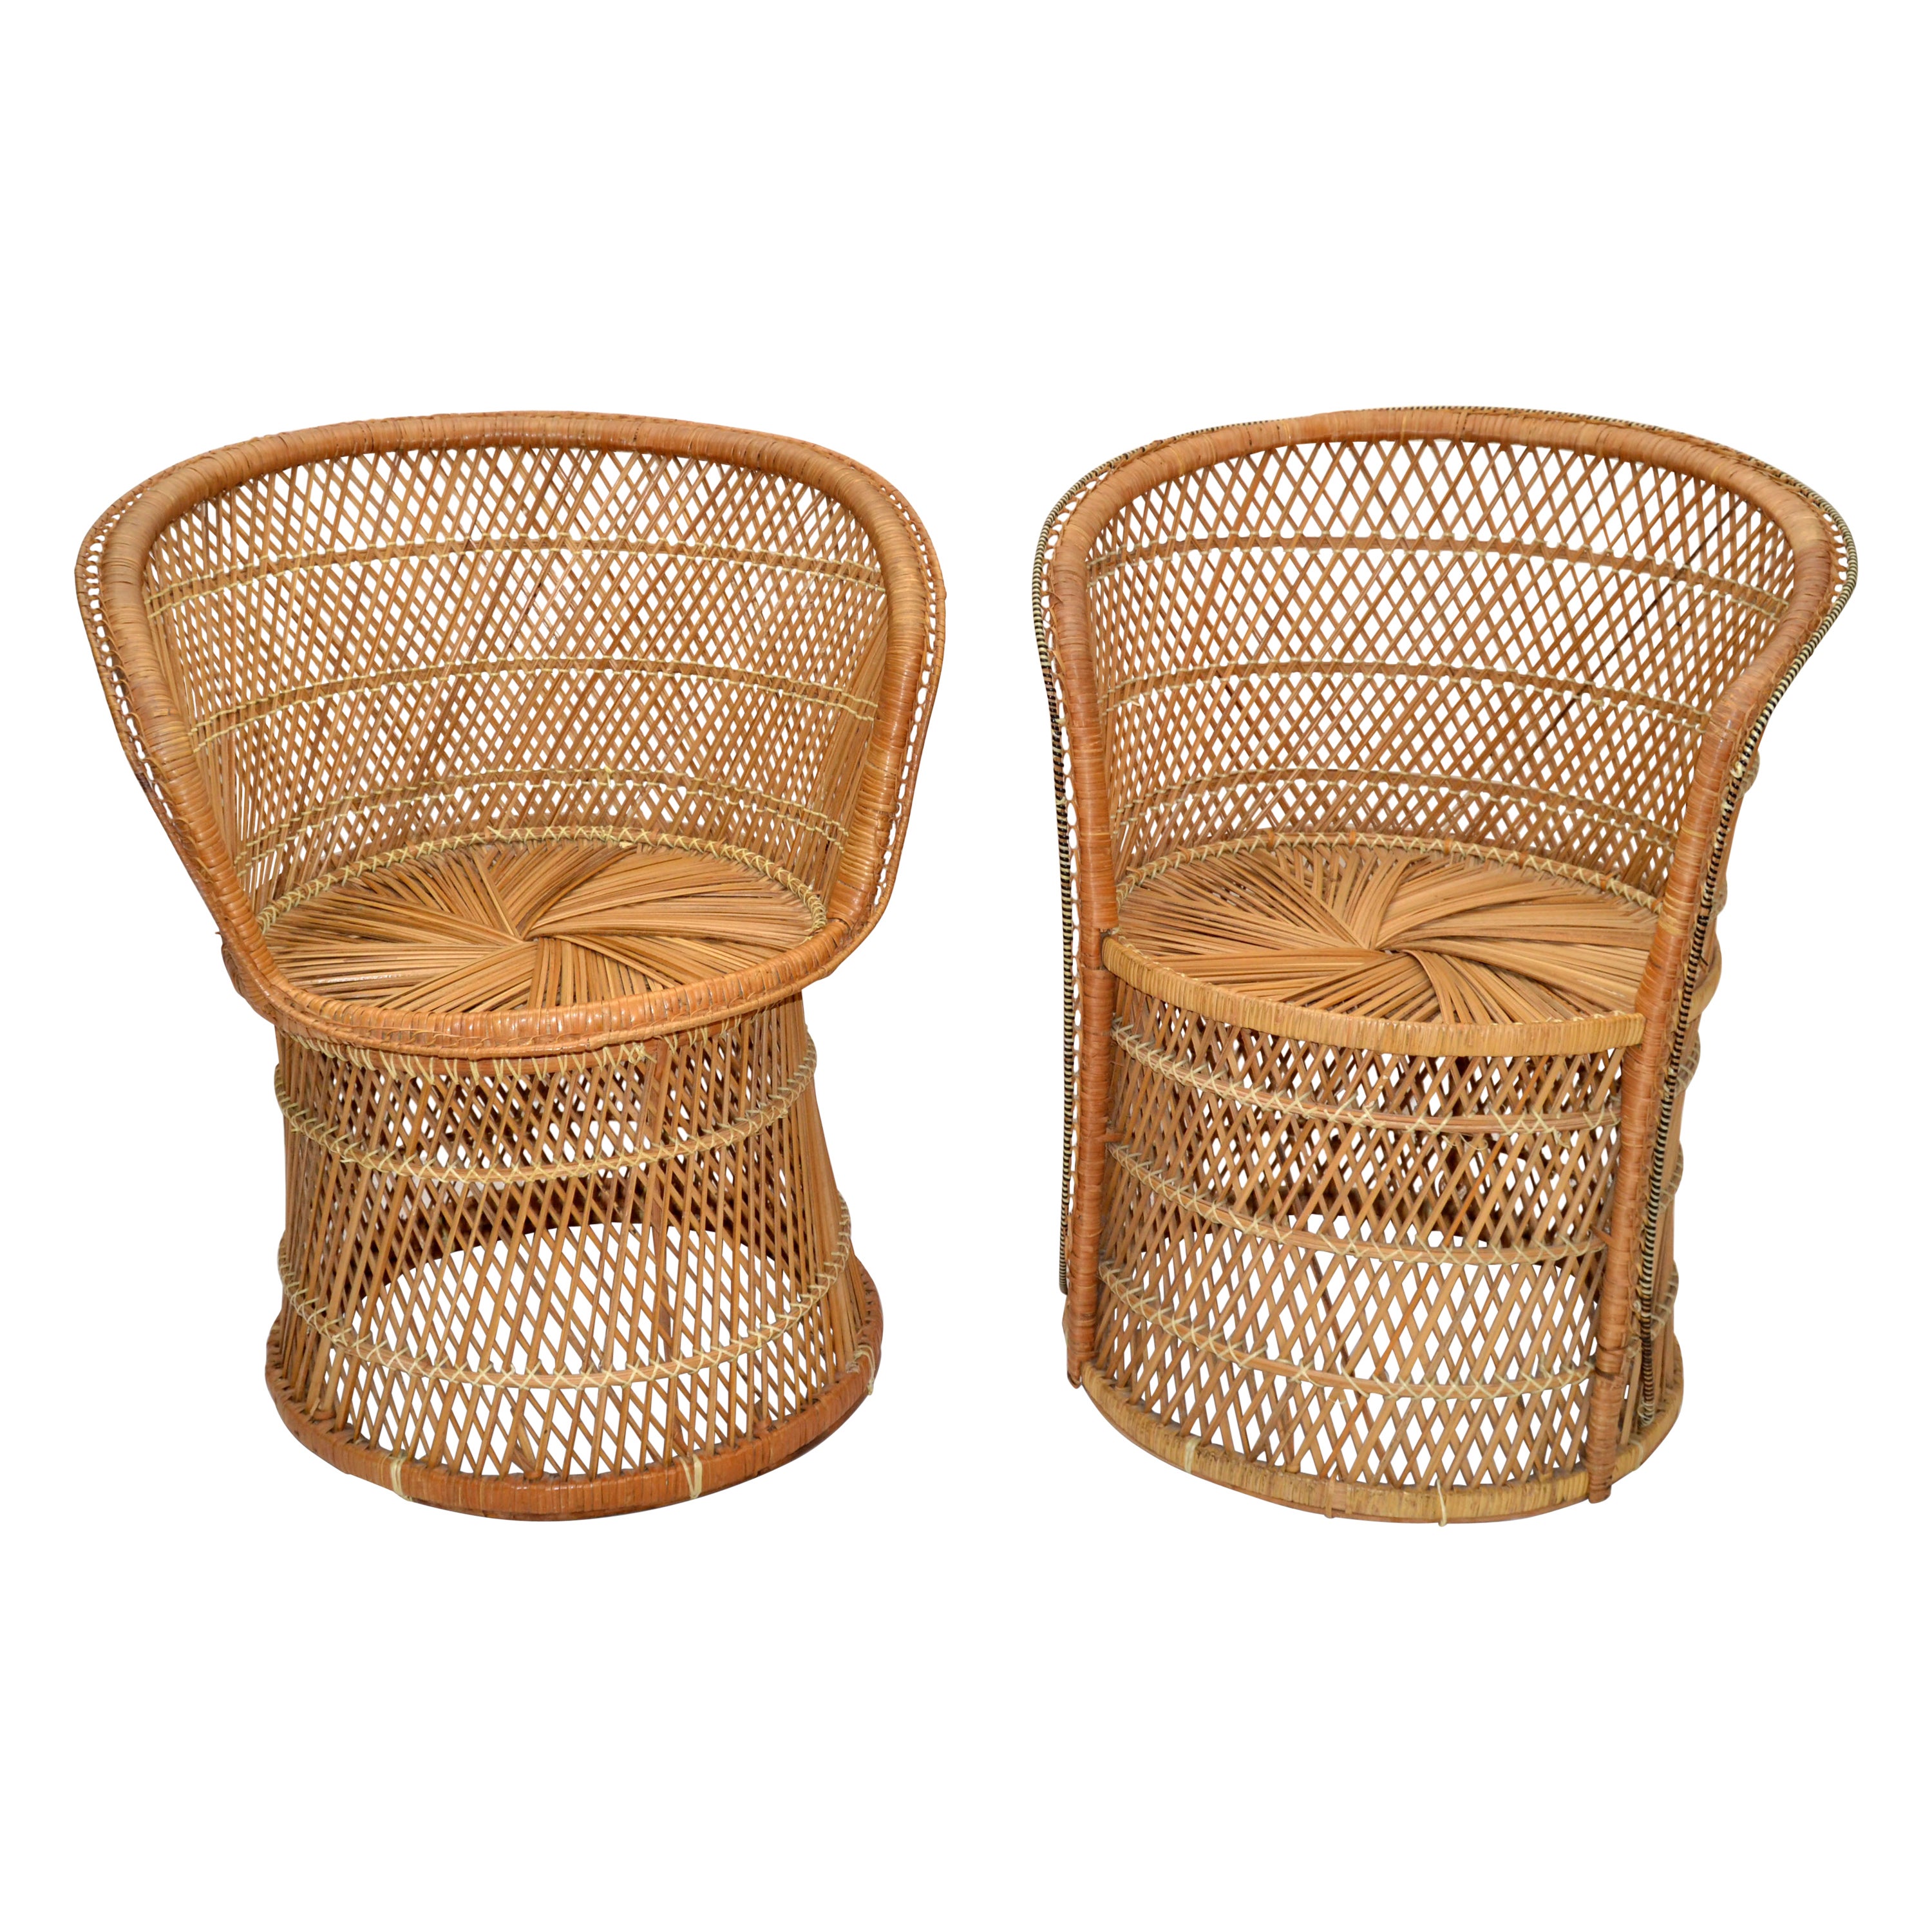 Him & Her Vintage Handwoven & Crafted Chinoiserie Rattan Cane & Bamboo Armchairs For Sale